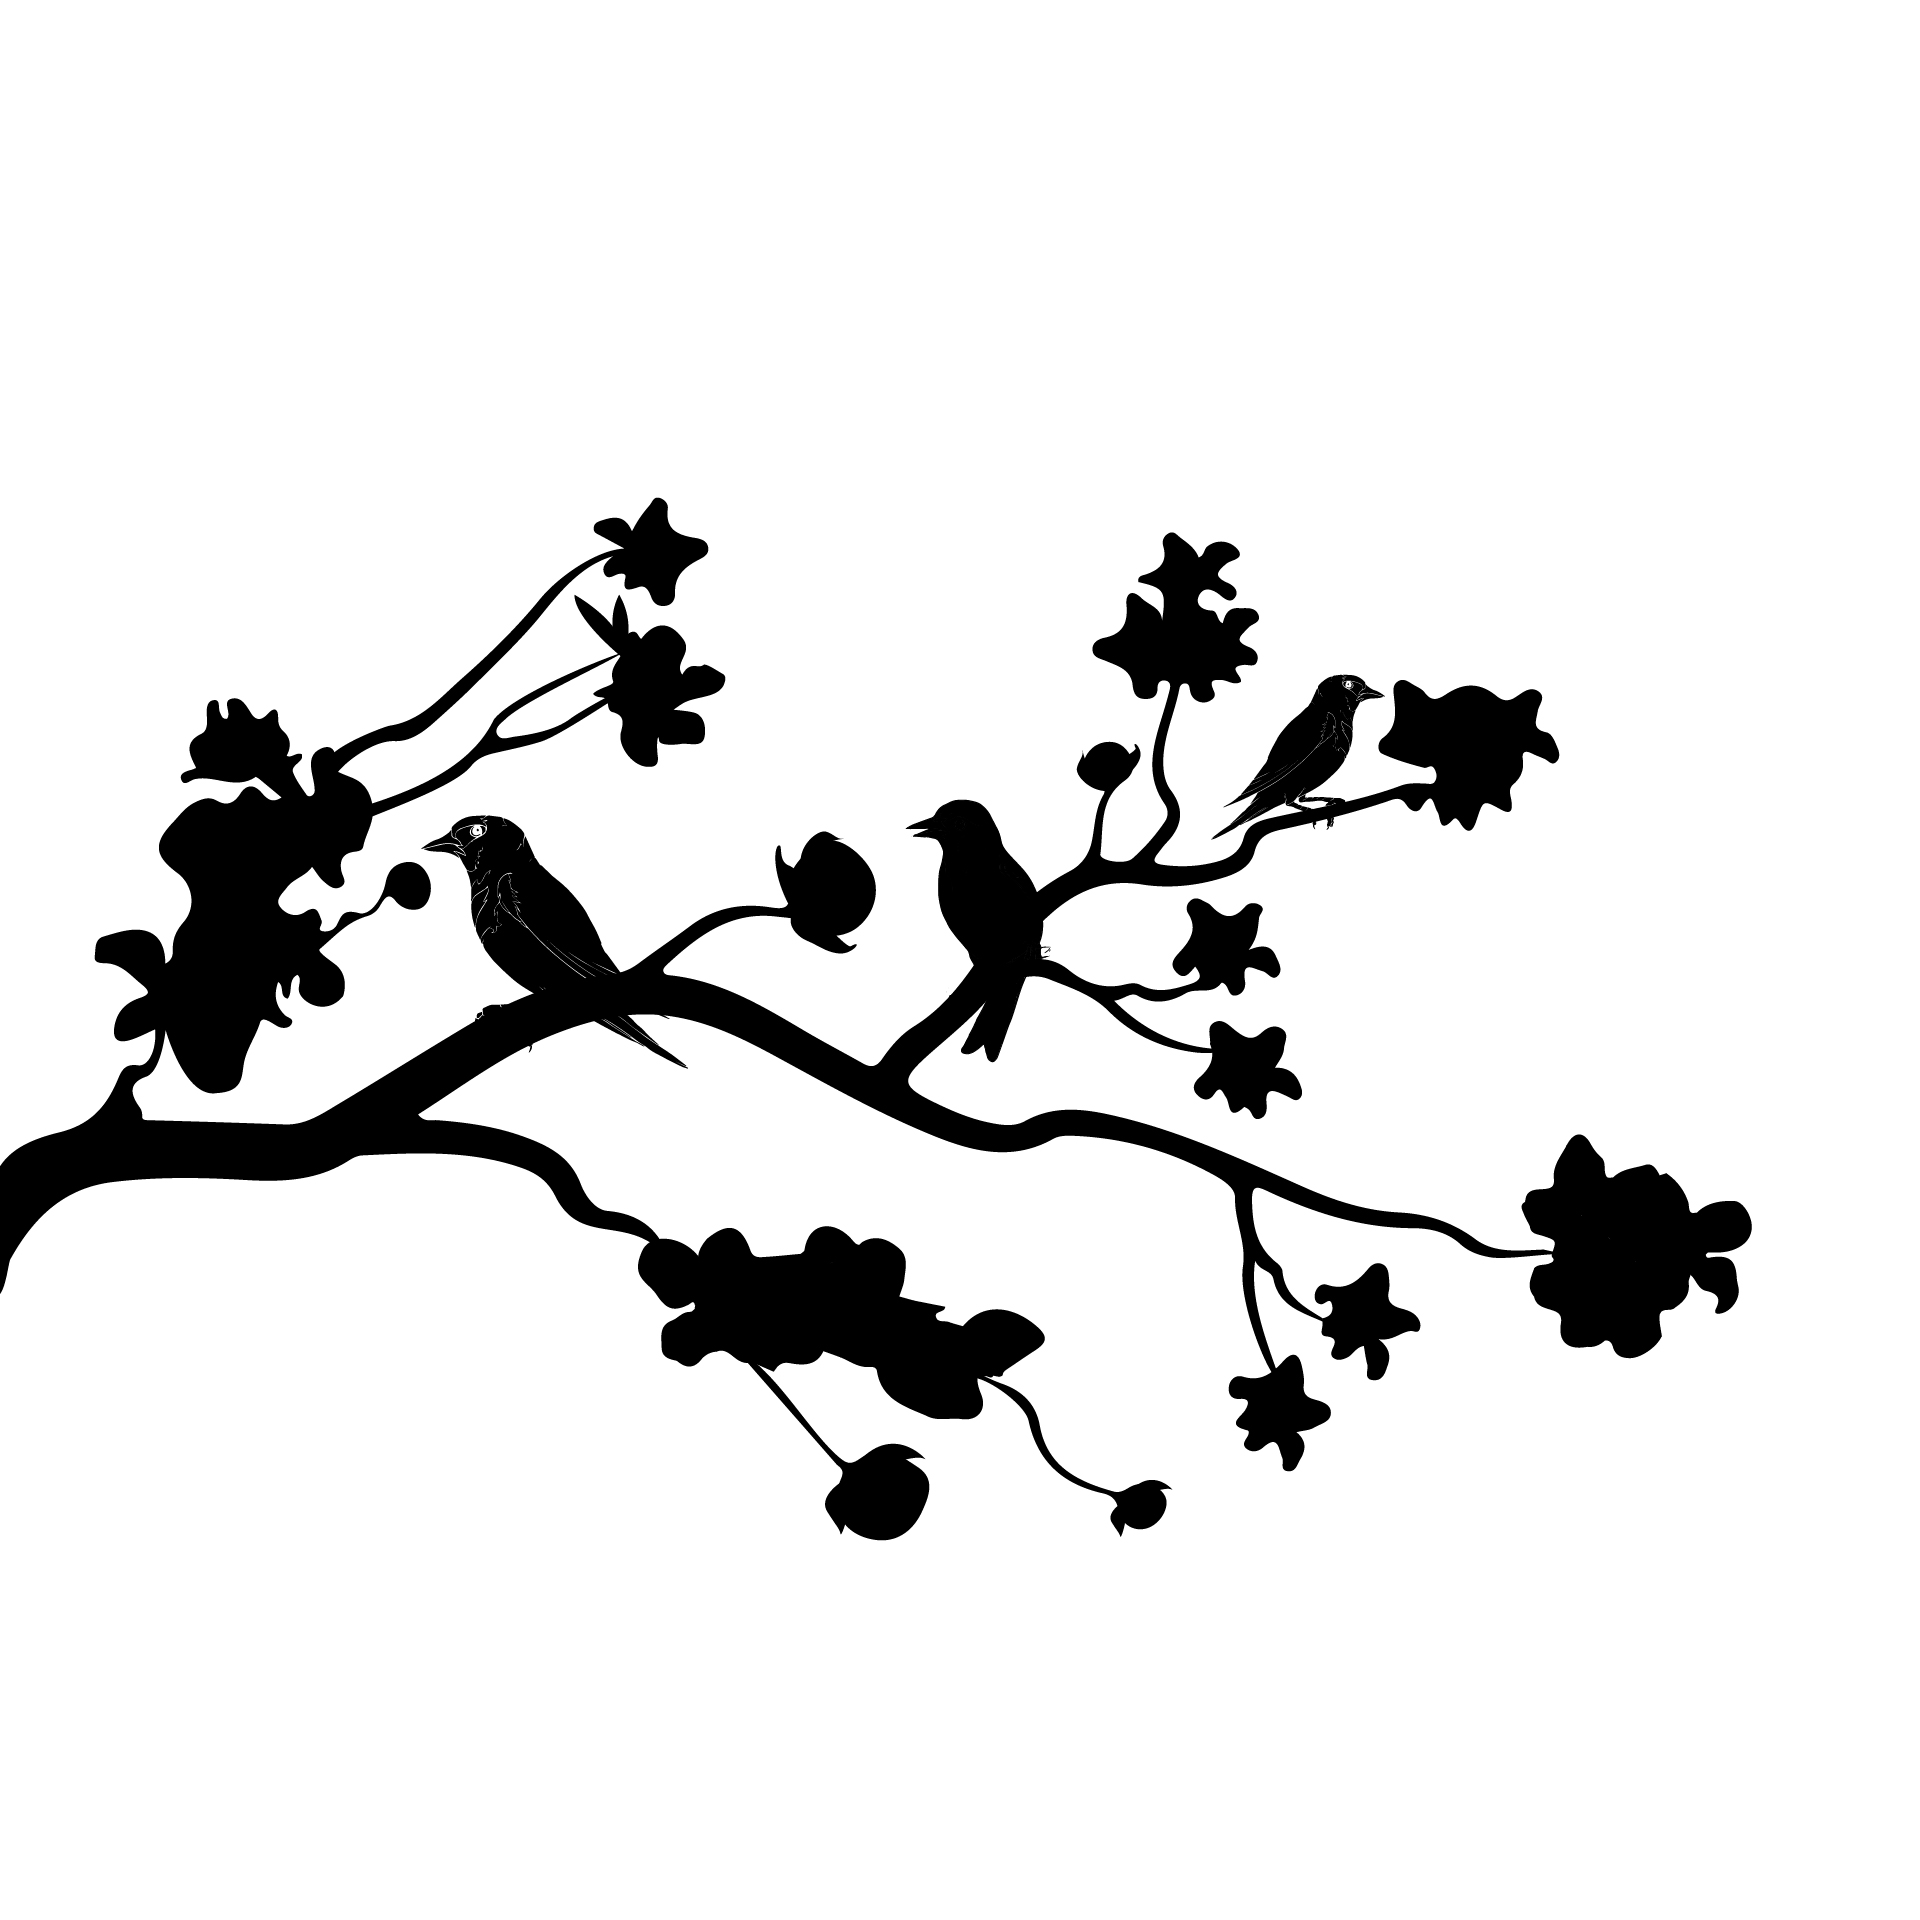 9-best-images-of-free-printable-bird-on-branch-printable-tree-branch-wall-stencils-free